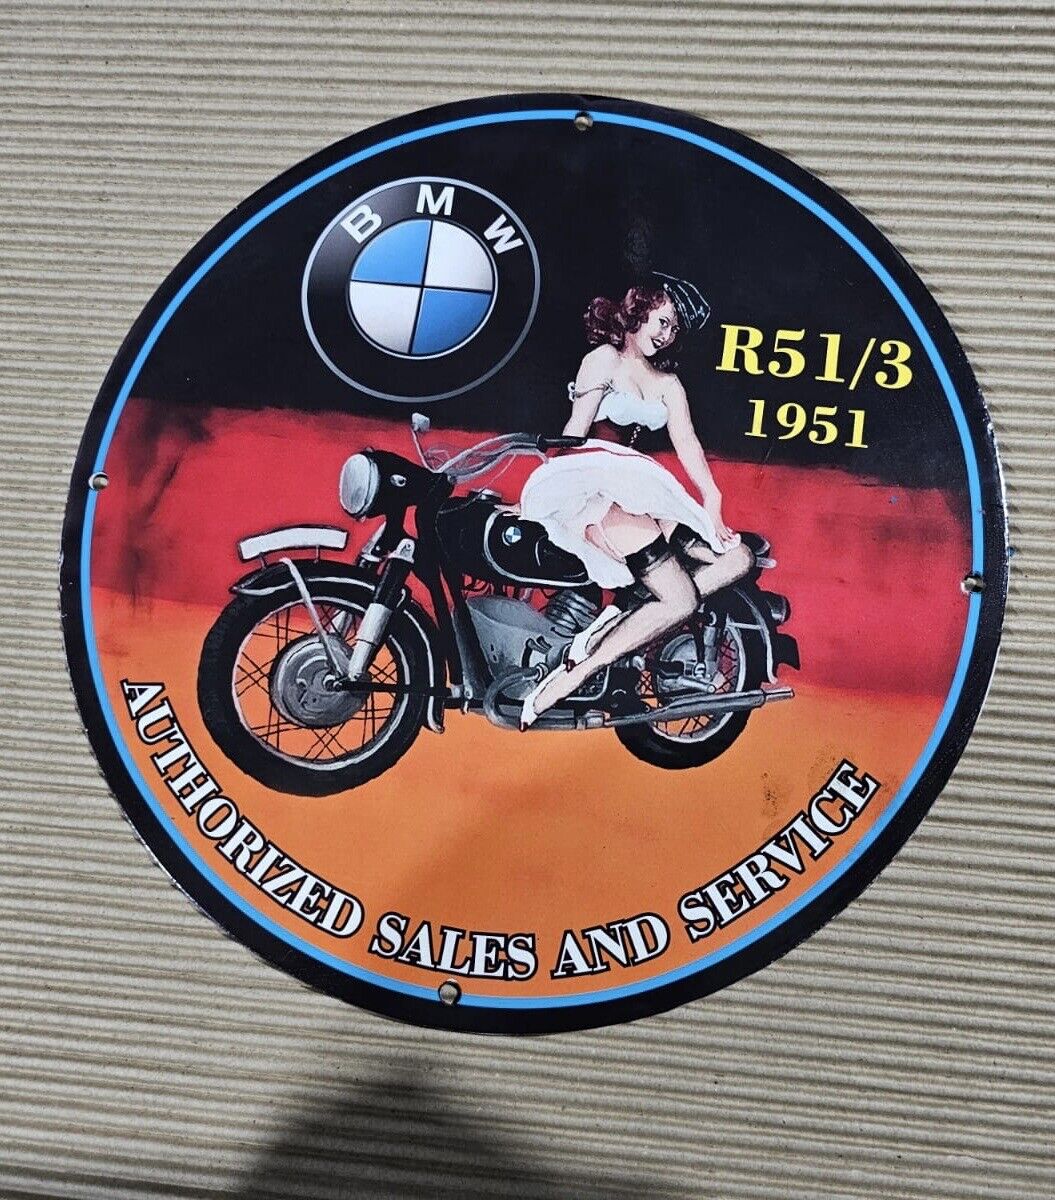 RARE BMW AUTHORIZED SALES & SERVICES PINUP GIRL PORCELAIN GAS OIL GARAGE AD SIGN